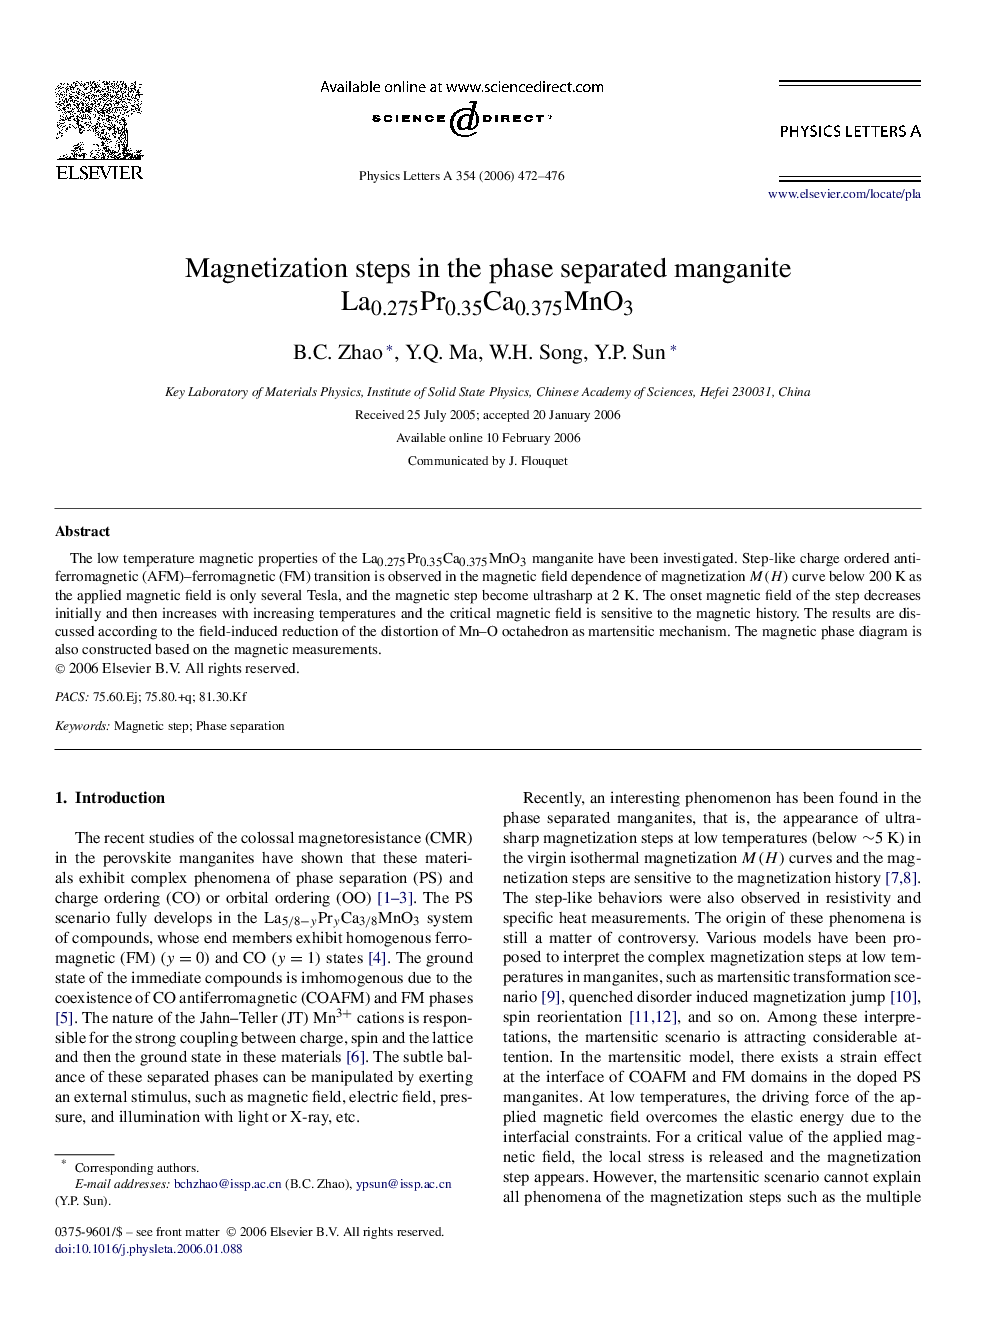 Magnetization steps in the phase separated manganite La0.275Pr0.35Ca0.375MnO3